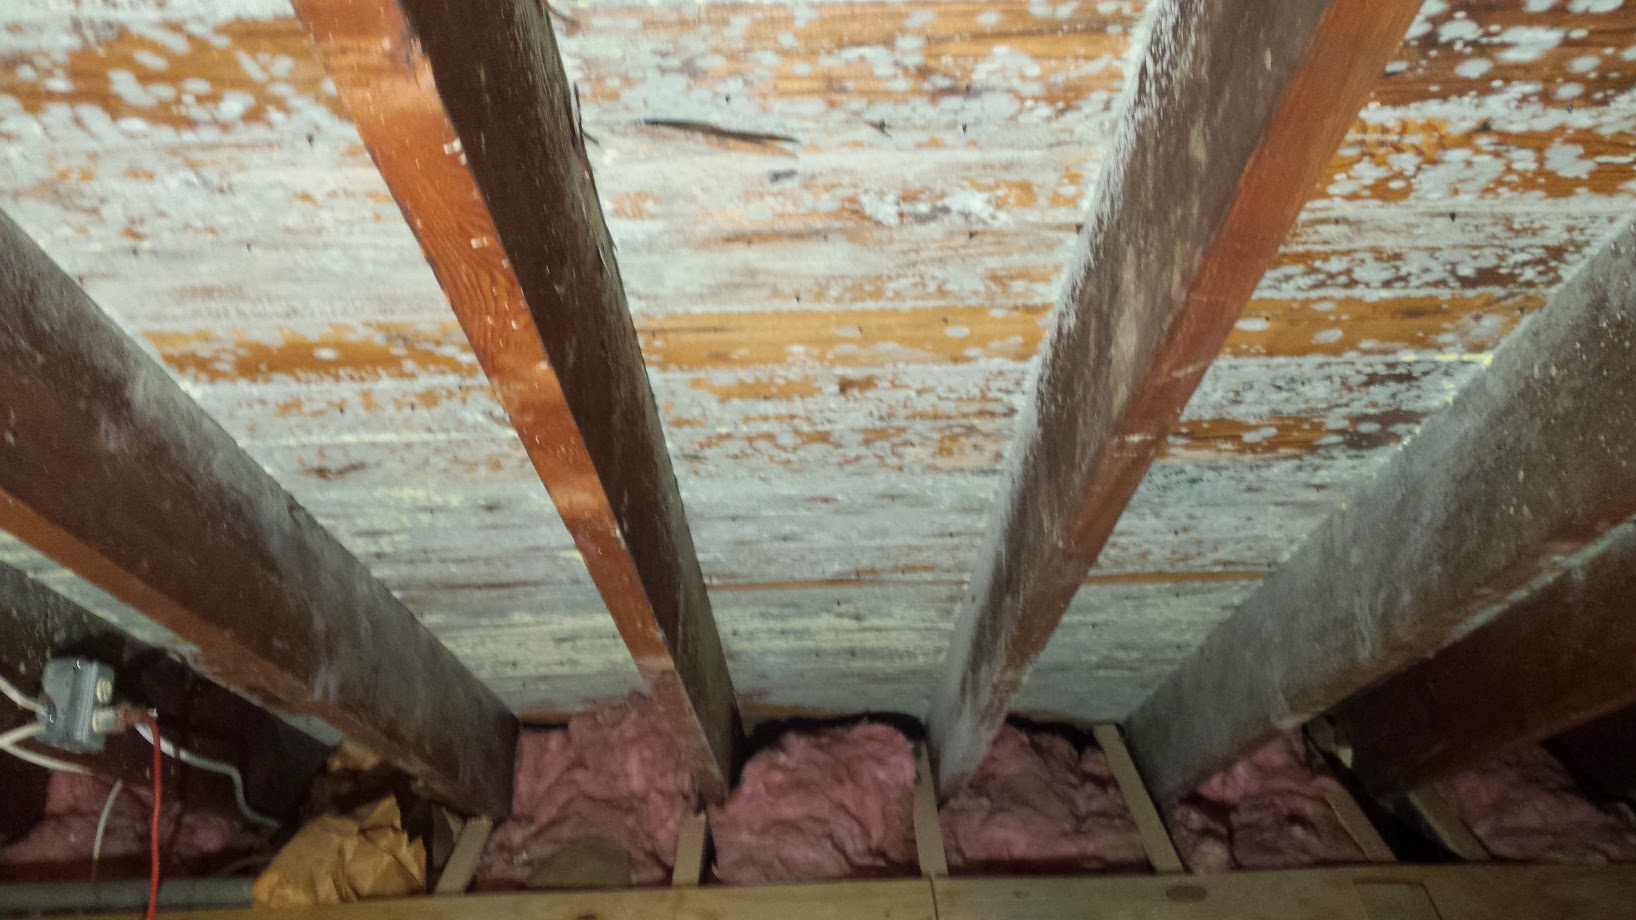 Mold In The Attic, Poor Ventilation Problems